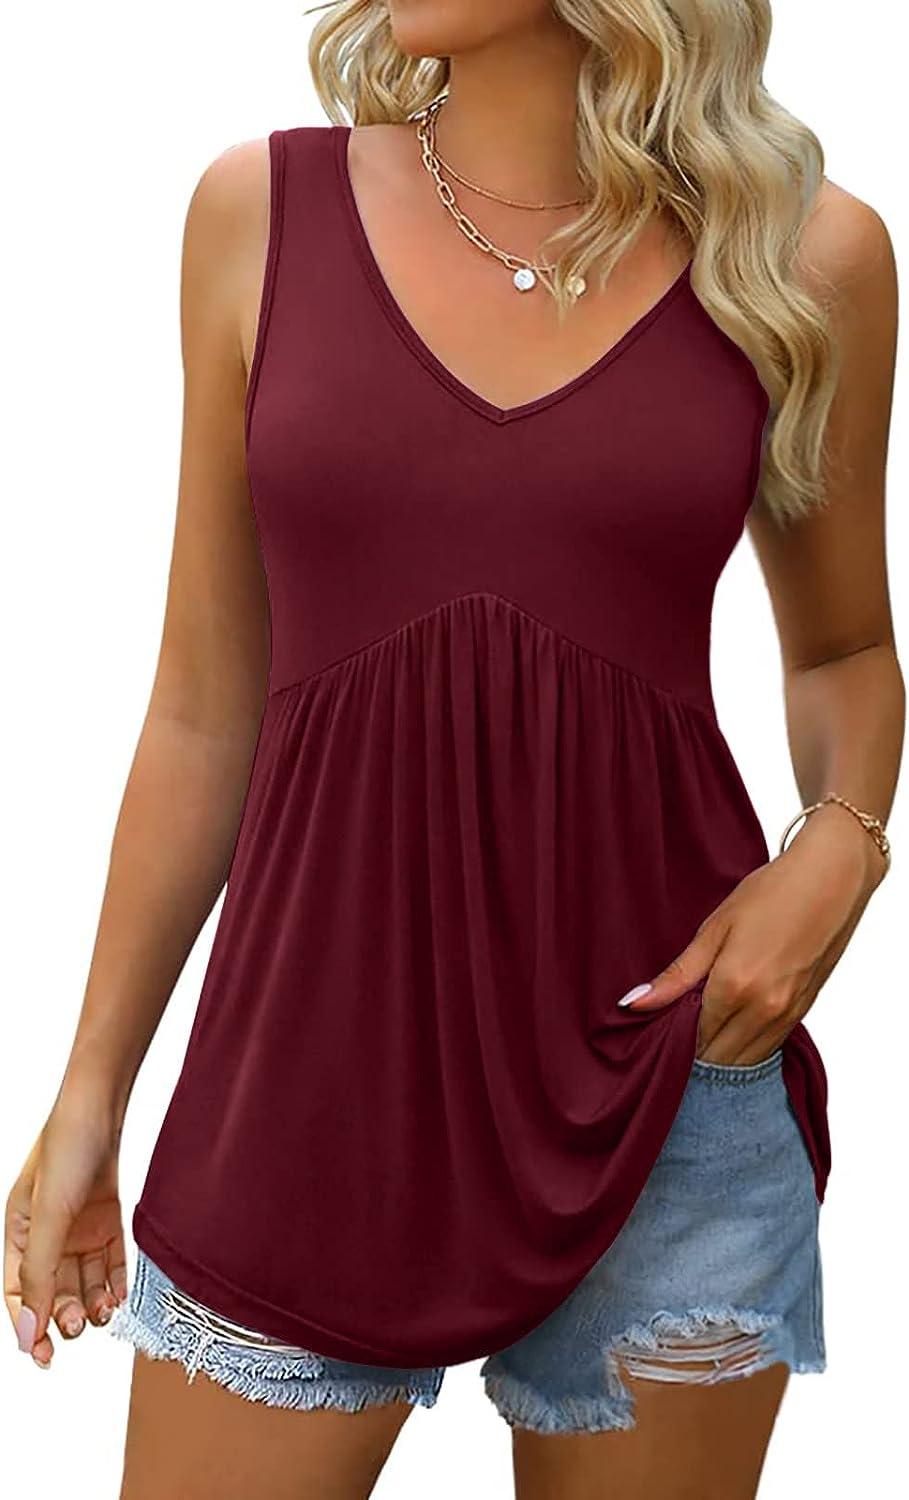 New Womens Lady Female Ribbed off Shoulder Tank Top Crop Tops Sleeveless T-shirt  Tops Summer Fashion Clothes Clothing for Woman -  New Zealand